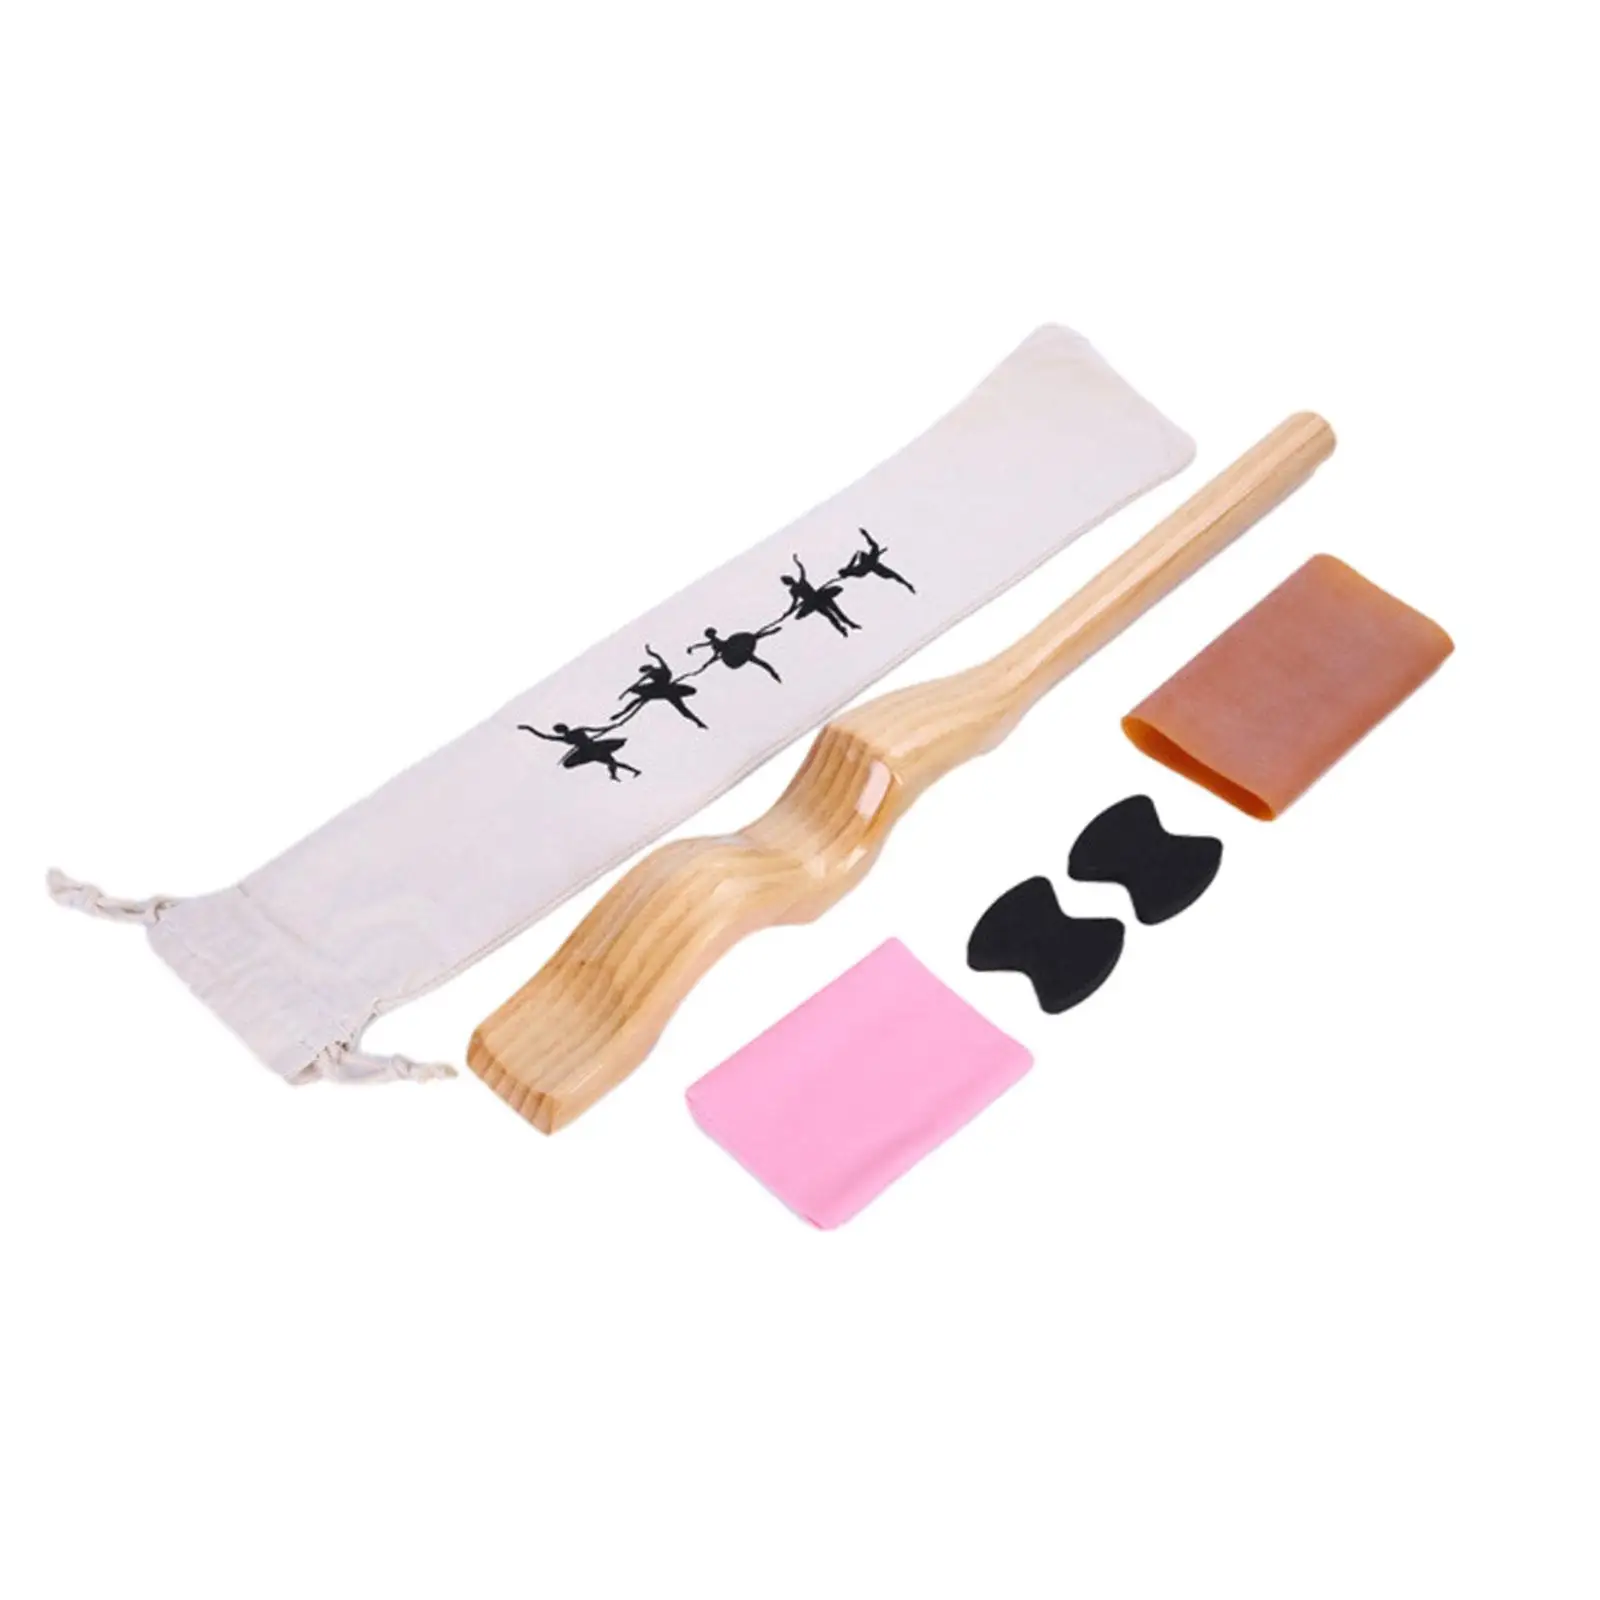 

Ballet Dance Foot Stretcher Portable with Elastic Band and Carry Bag Wood Ballet Accessory Set for Ballet Dancer Yoga People